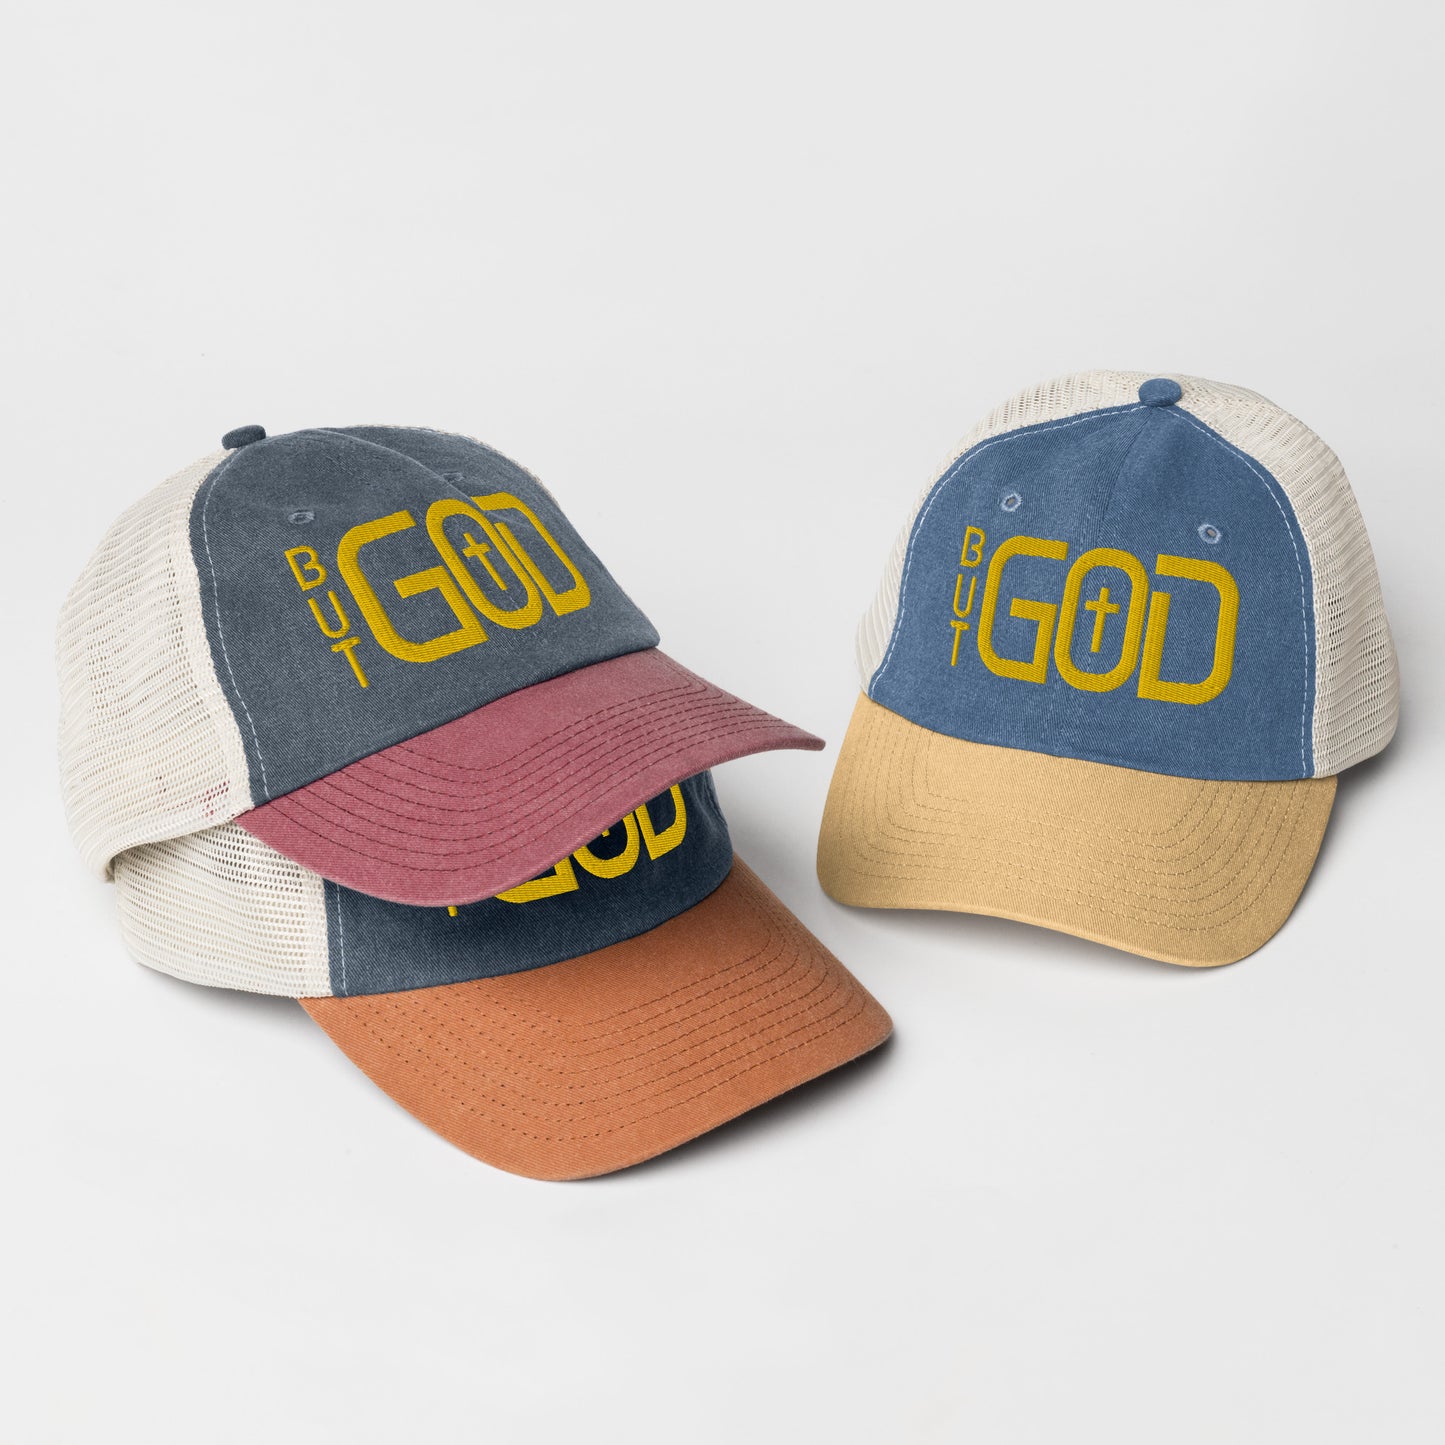 But GOD - Many Colors Pigment-dyed cap